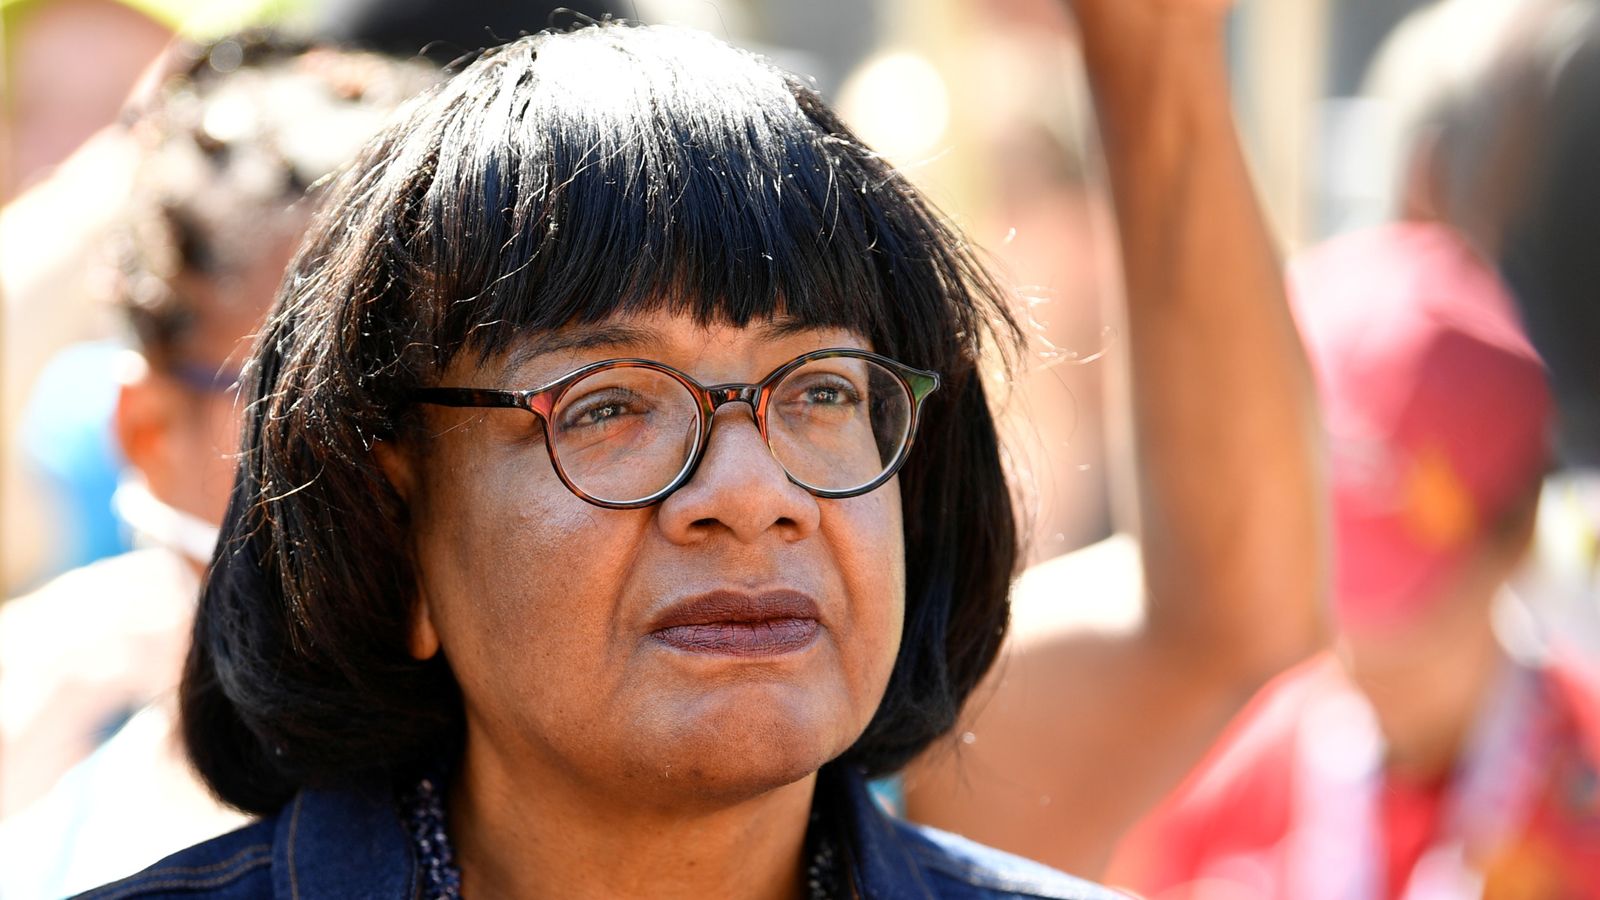 Diane Abbott accused of 'exploiting tragedy' in now-deleted tweet over migrant deaths